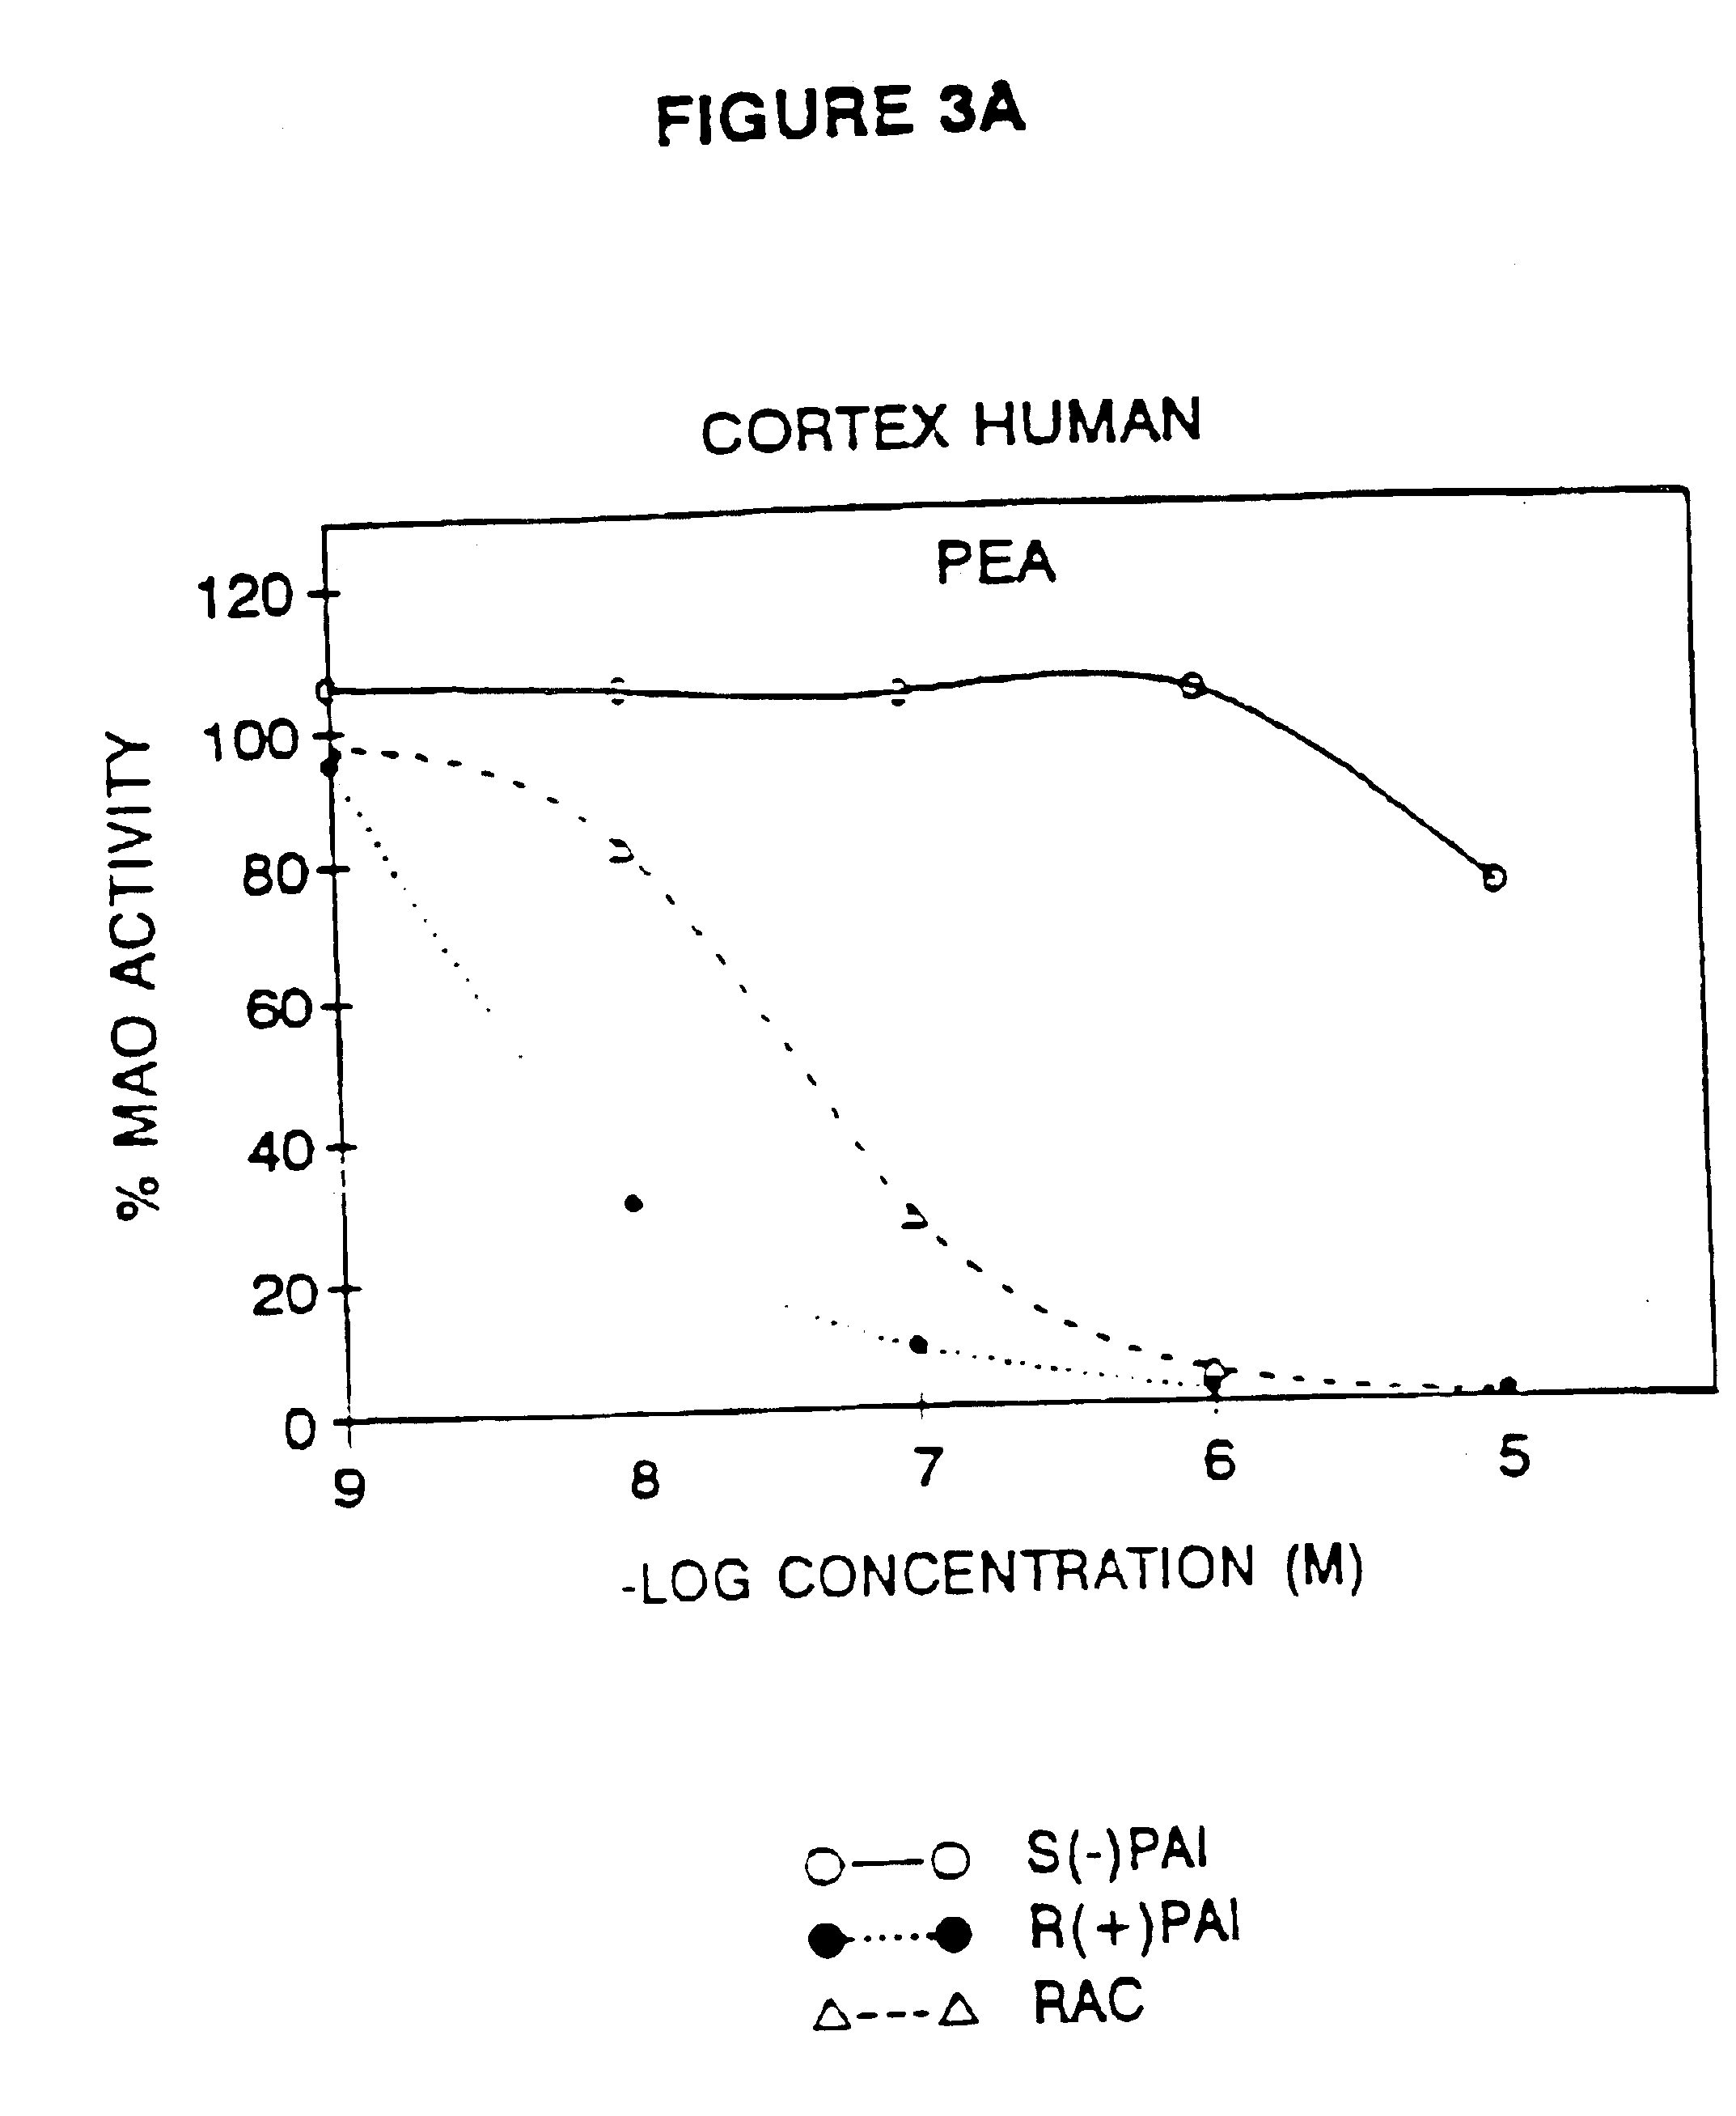 Use of R-enantiomer of N-propargyl-1-aminoindan, salts, and compositions thereof